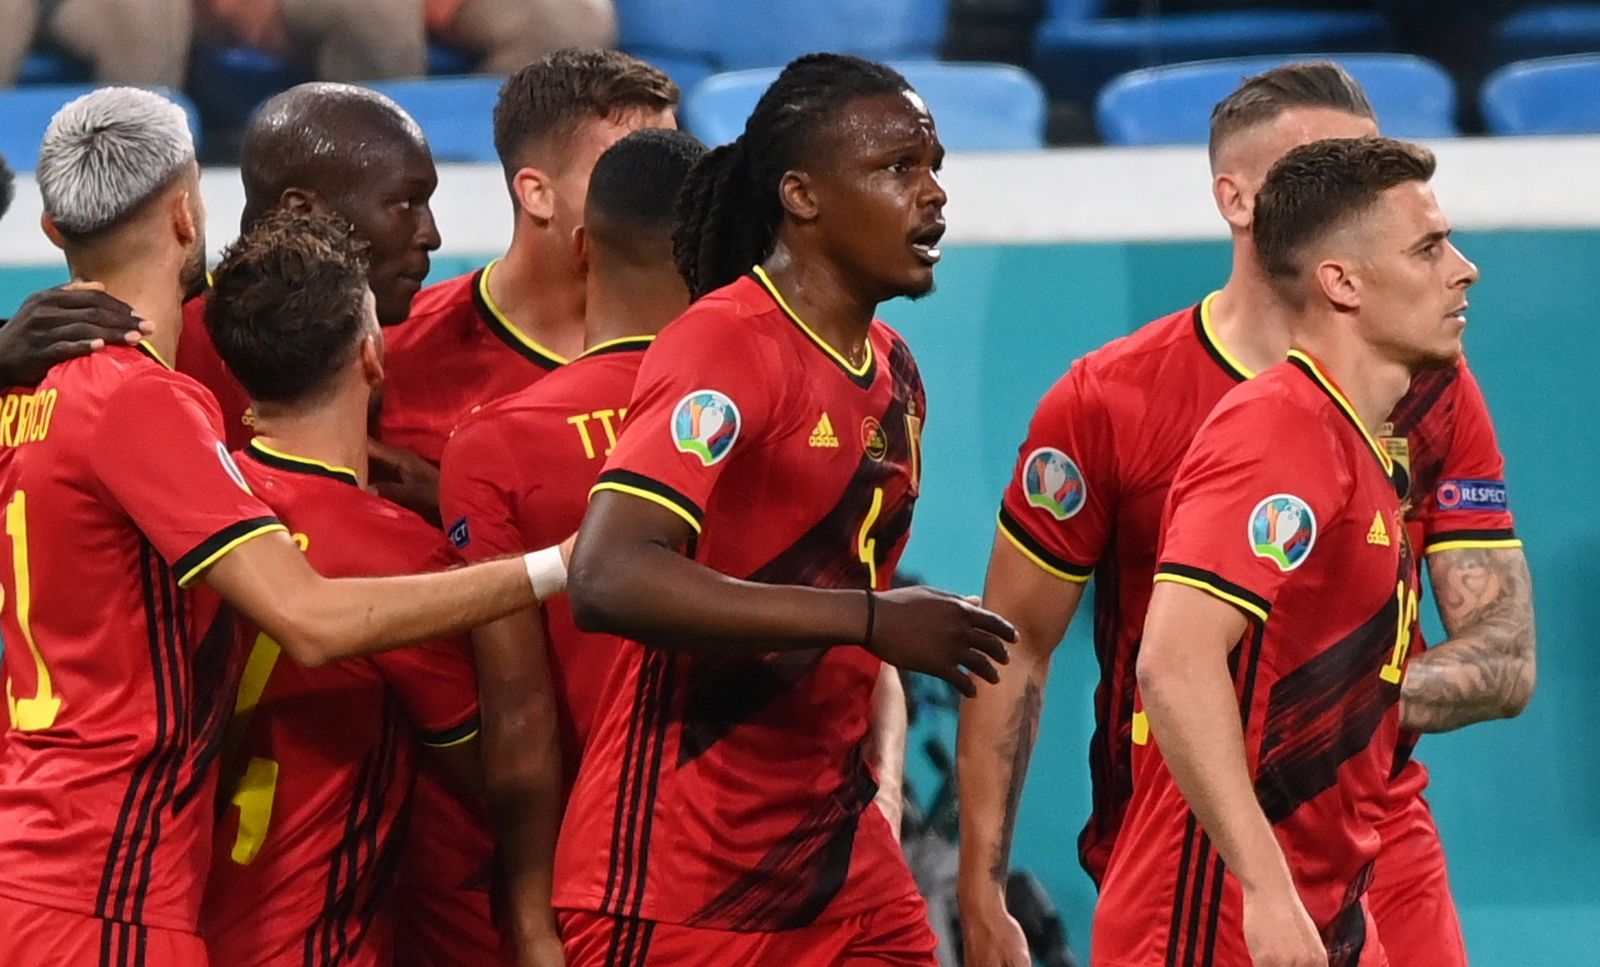 epa09265883 Romelu Lukaku (2-L, top) of Belgium celebrates with teammates after scoring his team's first goal during the UEFA EURO 2020 group B preliminary round soccer match between  Belgium and Russia in St.Petersburg, Russia, 12 June 2021.  EPA/Kirill Kudryavtsev / POOL (RESTRICTIONS: For editorial news reporting purposes only. Images must appear as still images and must not emulate match action video footage. Photographs published in online publications shall have an interval of at least 20 seconds between the posting.)